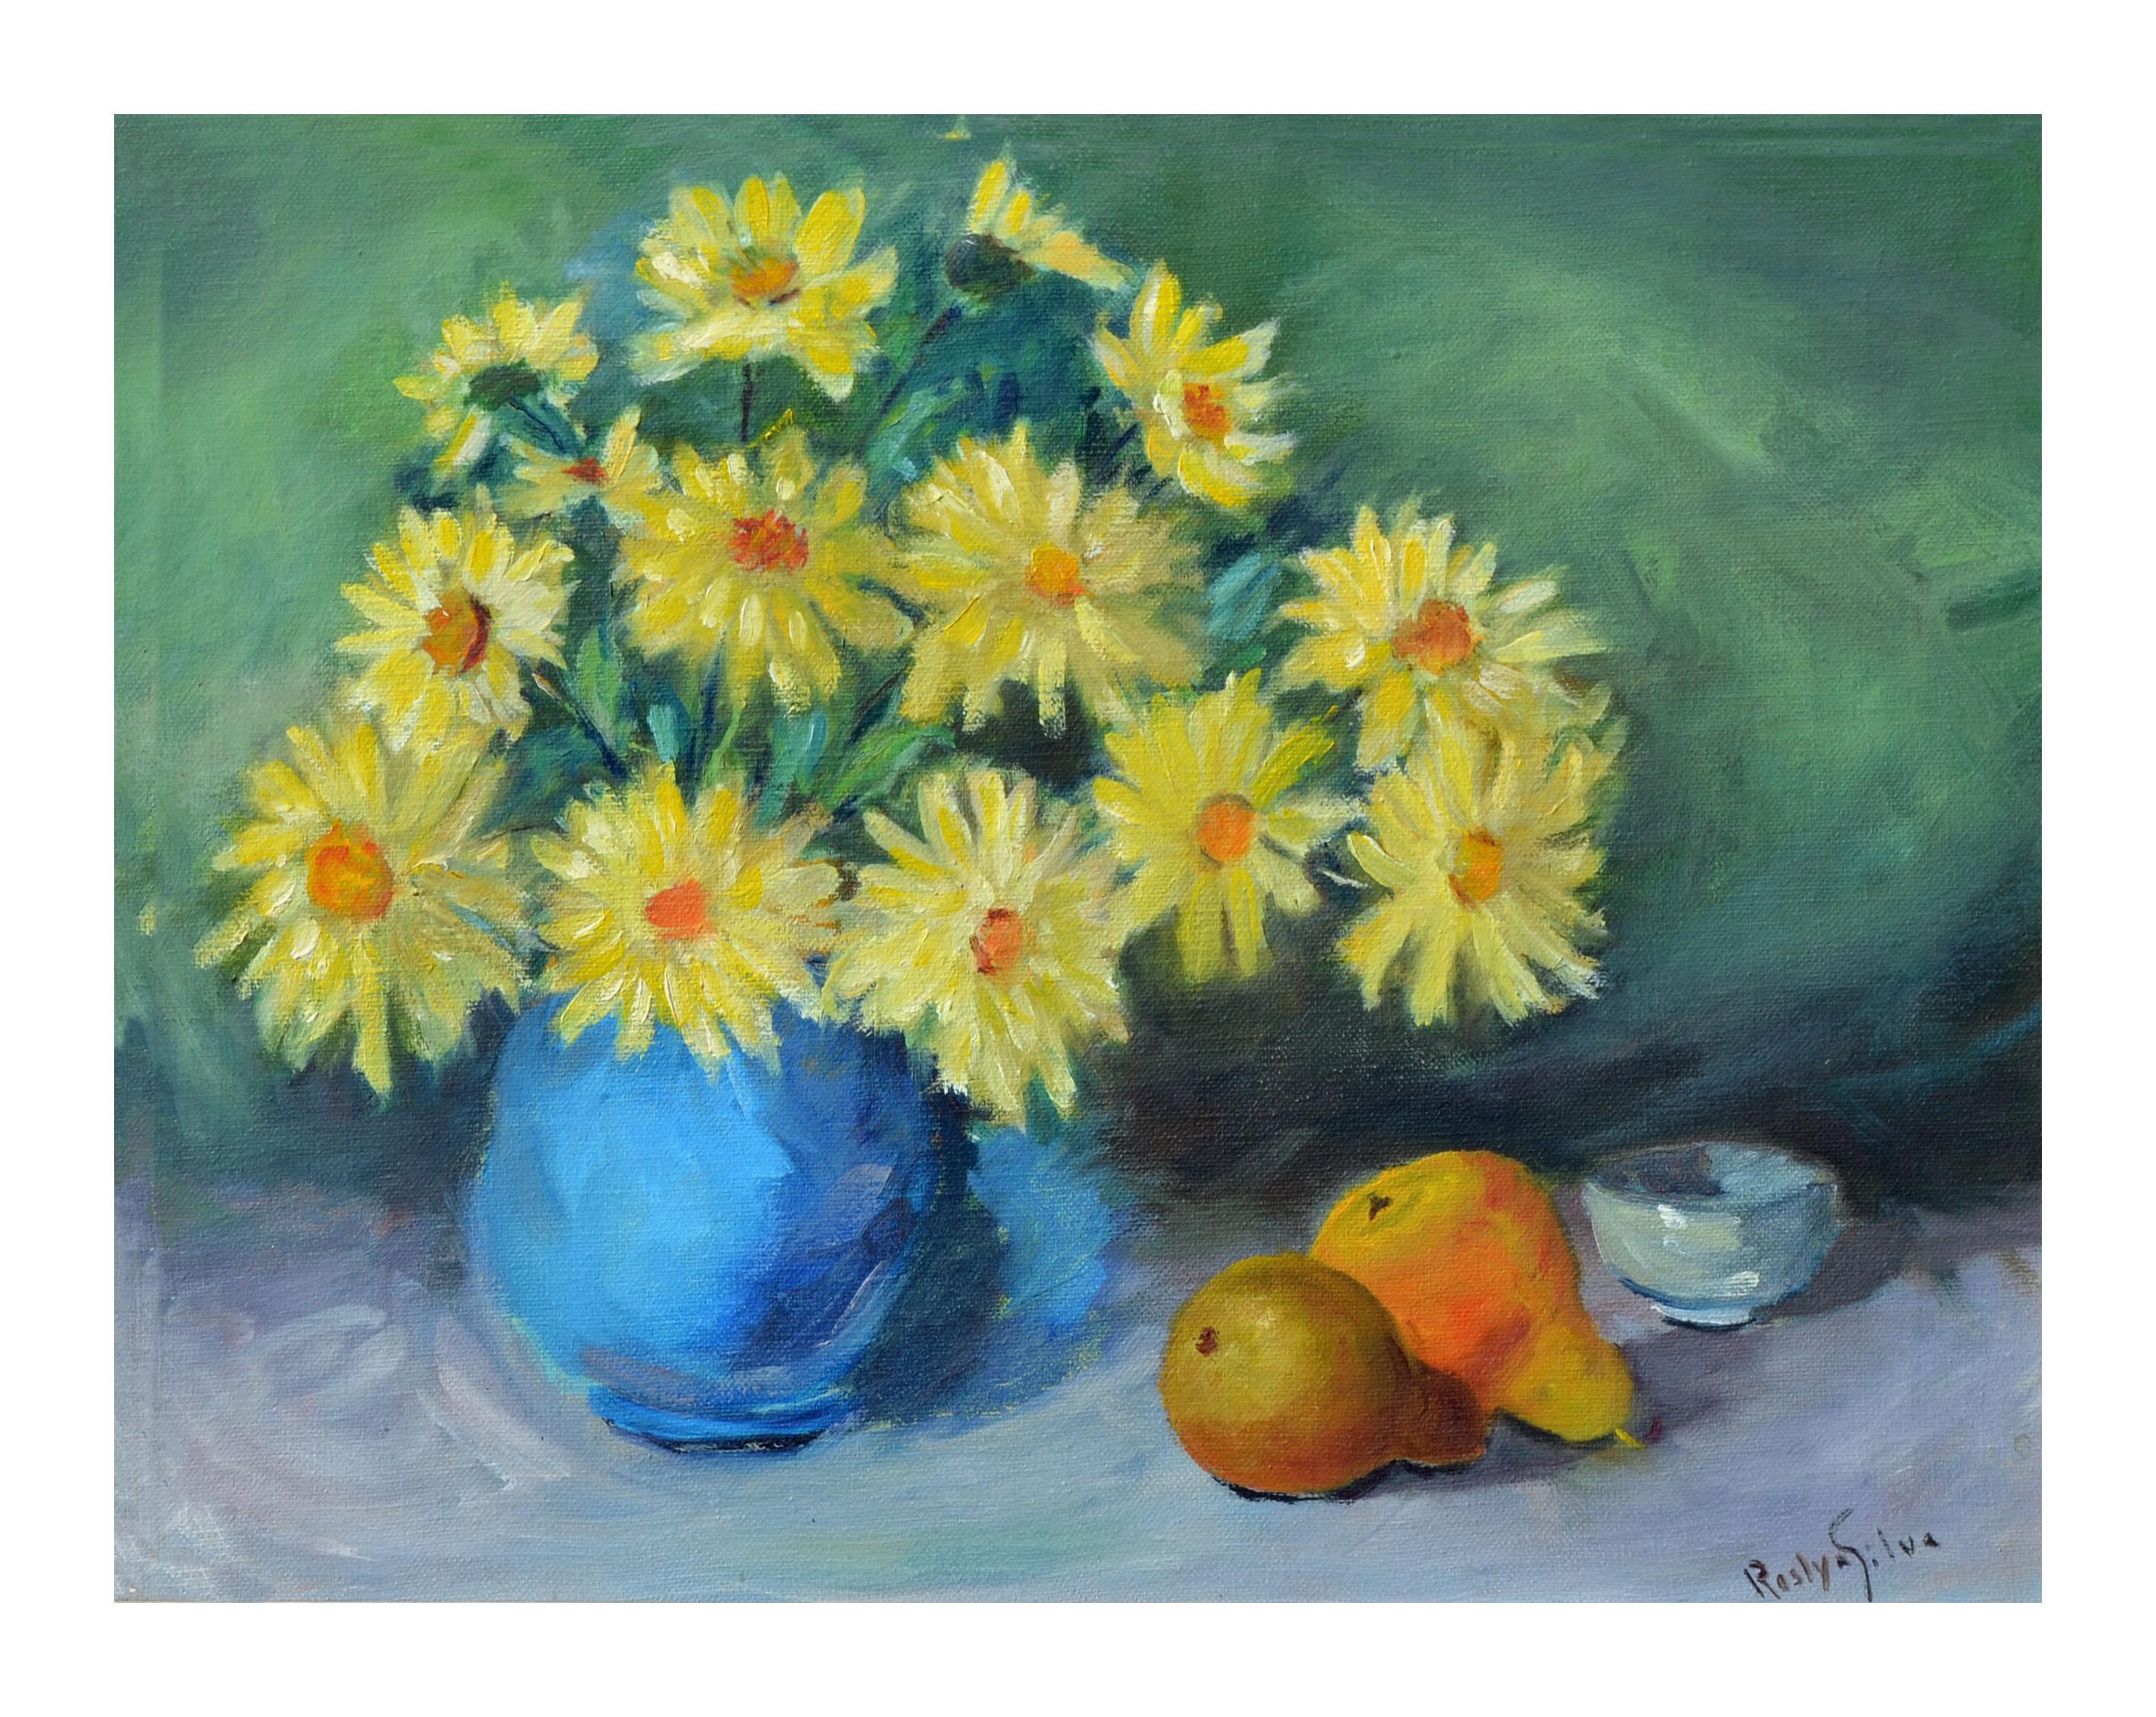 Yellow Daisies and Pears Still Life - Painting by Roslyn B Silva (American,1911-2005)